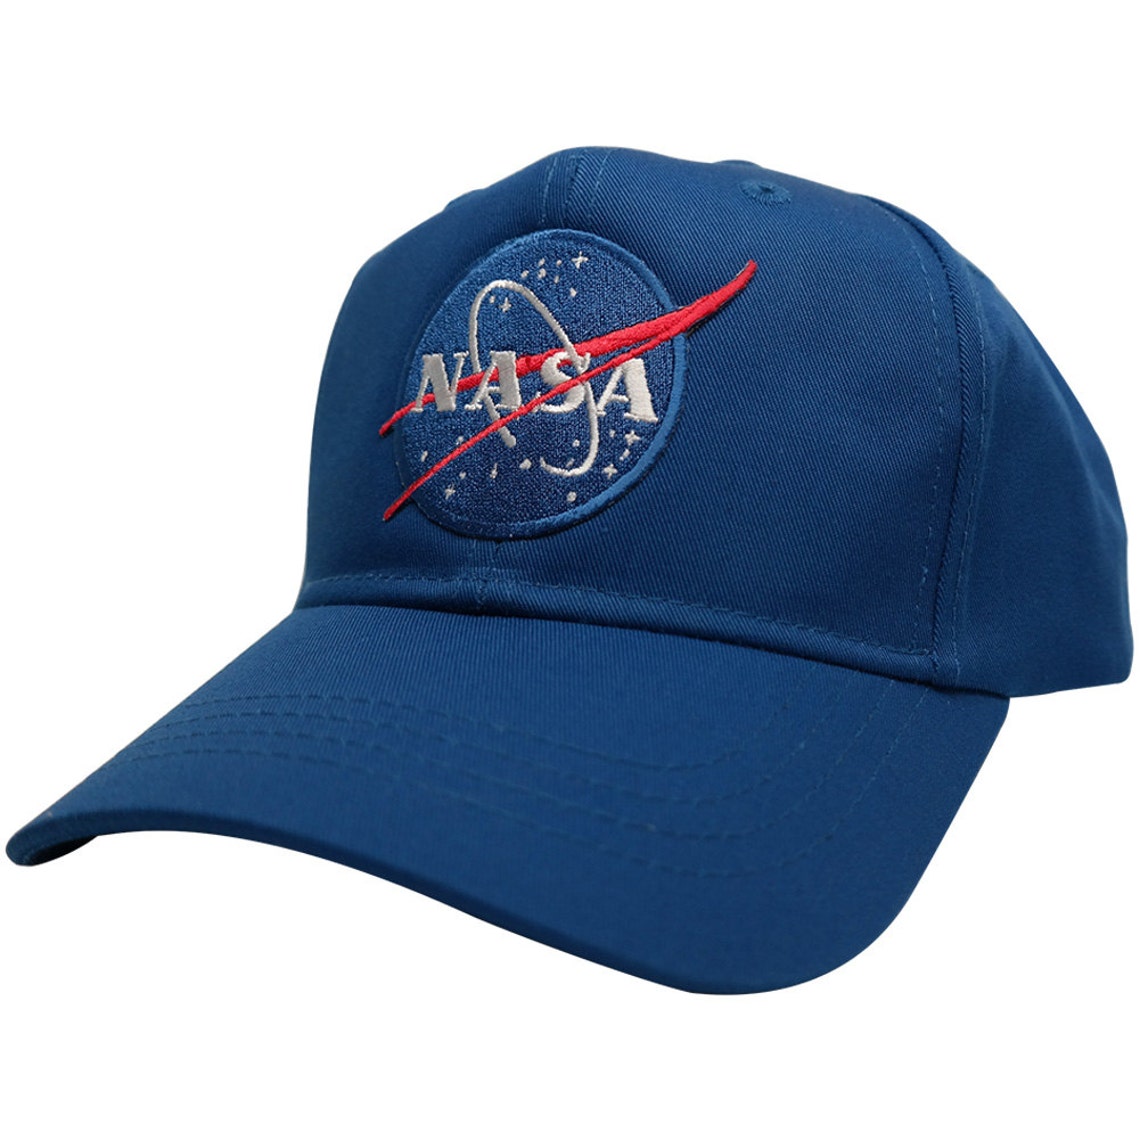 Youth NASA Insignia Embroidered Patch Cotton Pro Style Cap - Etsy